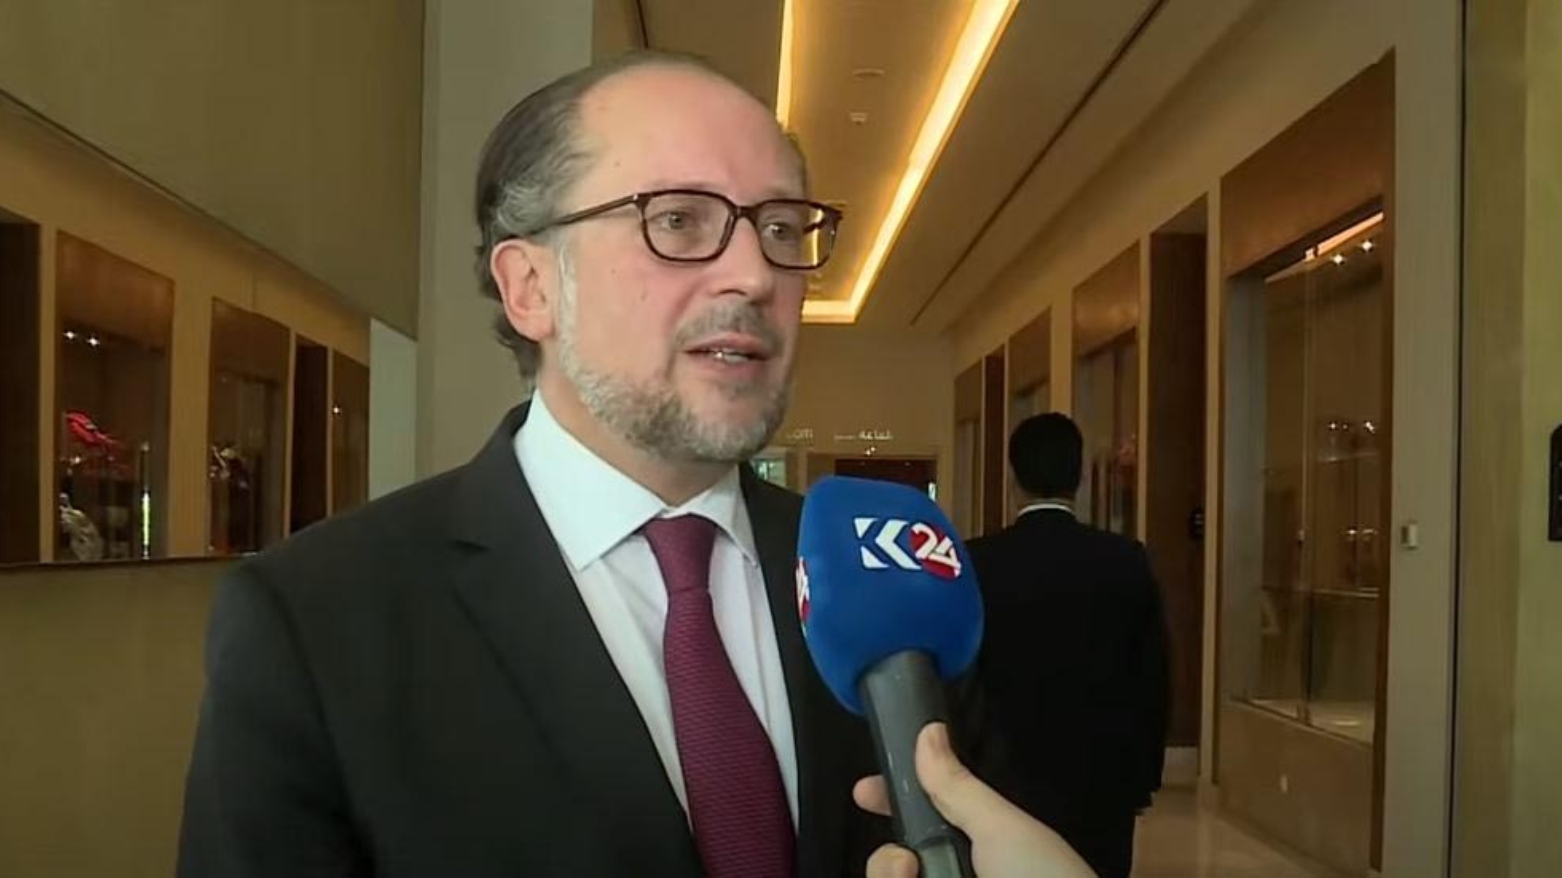 Next step should be honorary council in Erbil says Austrian FM